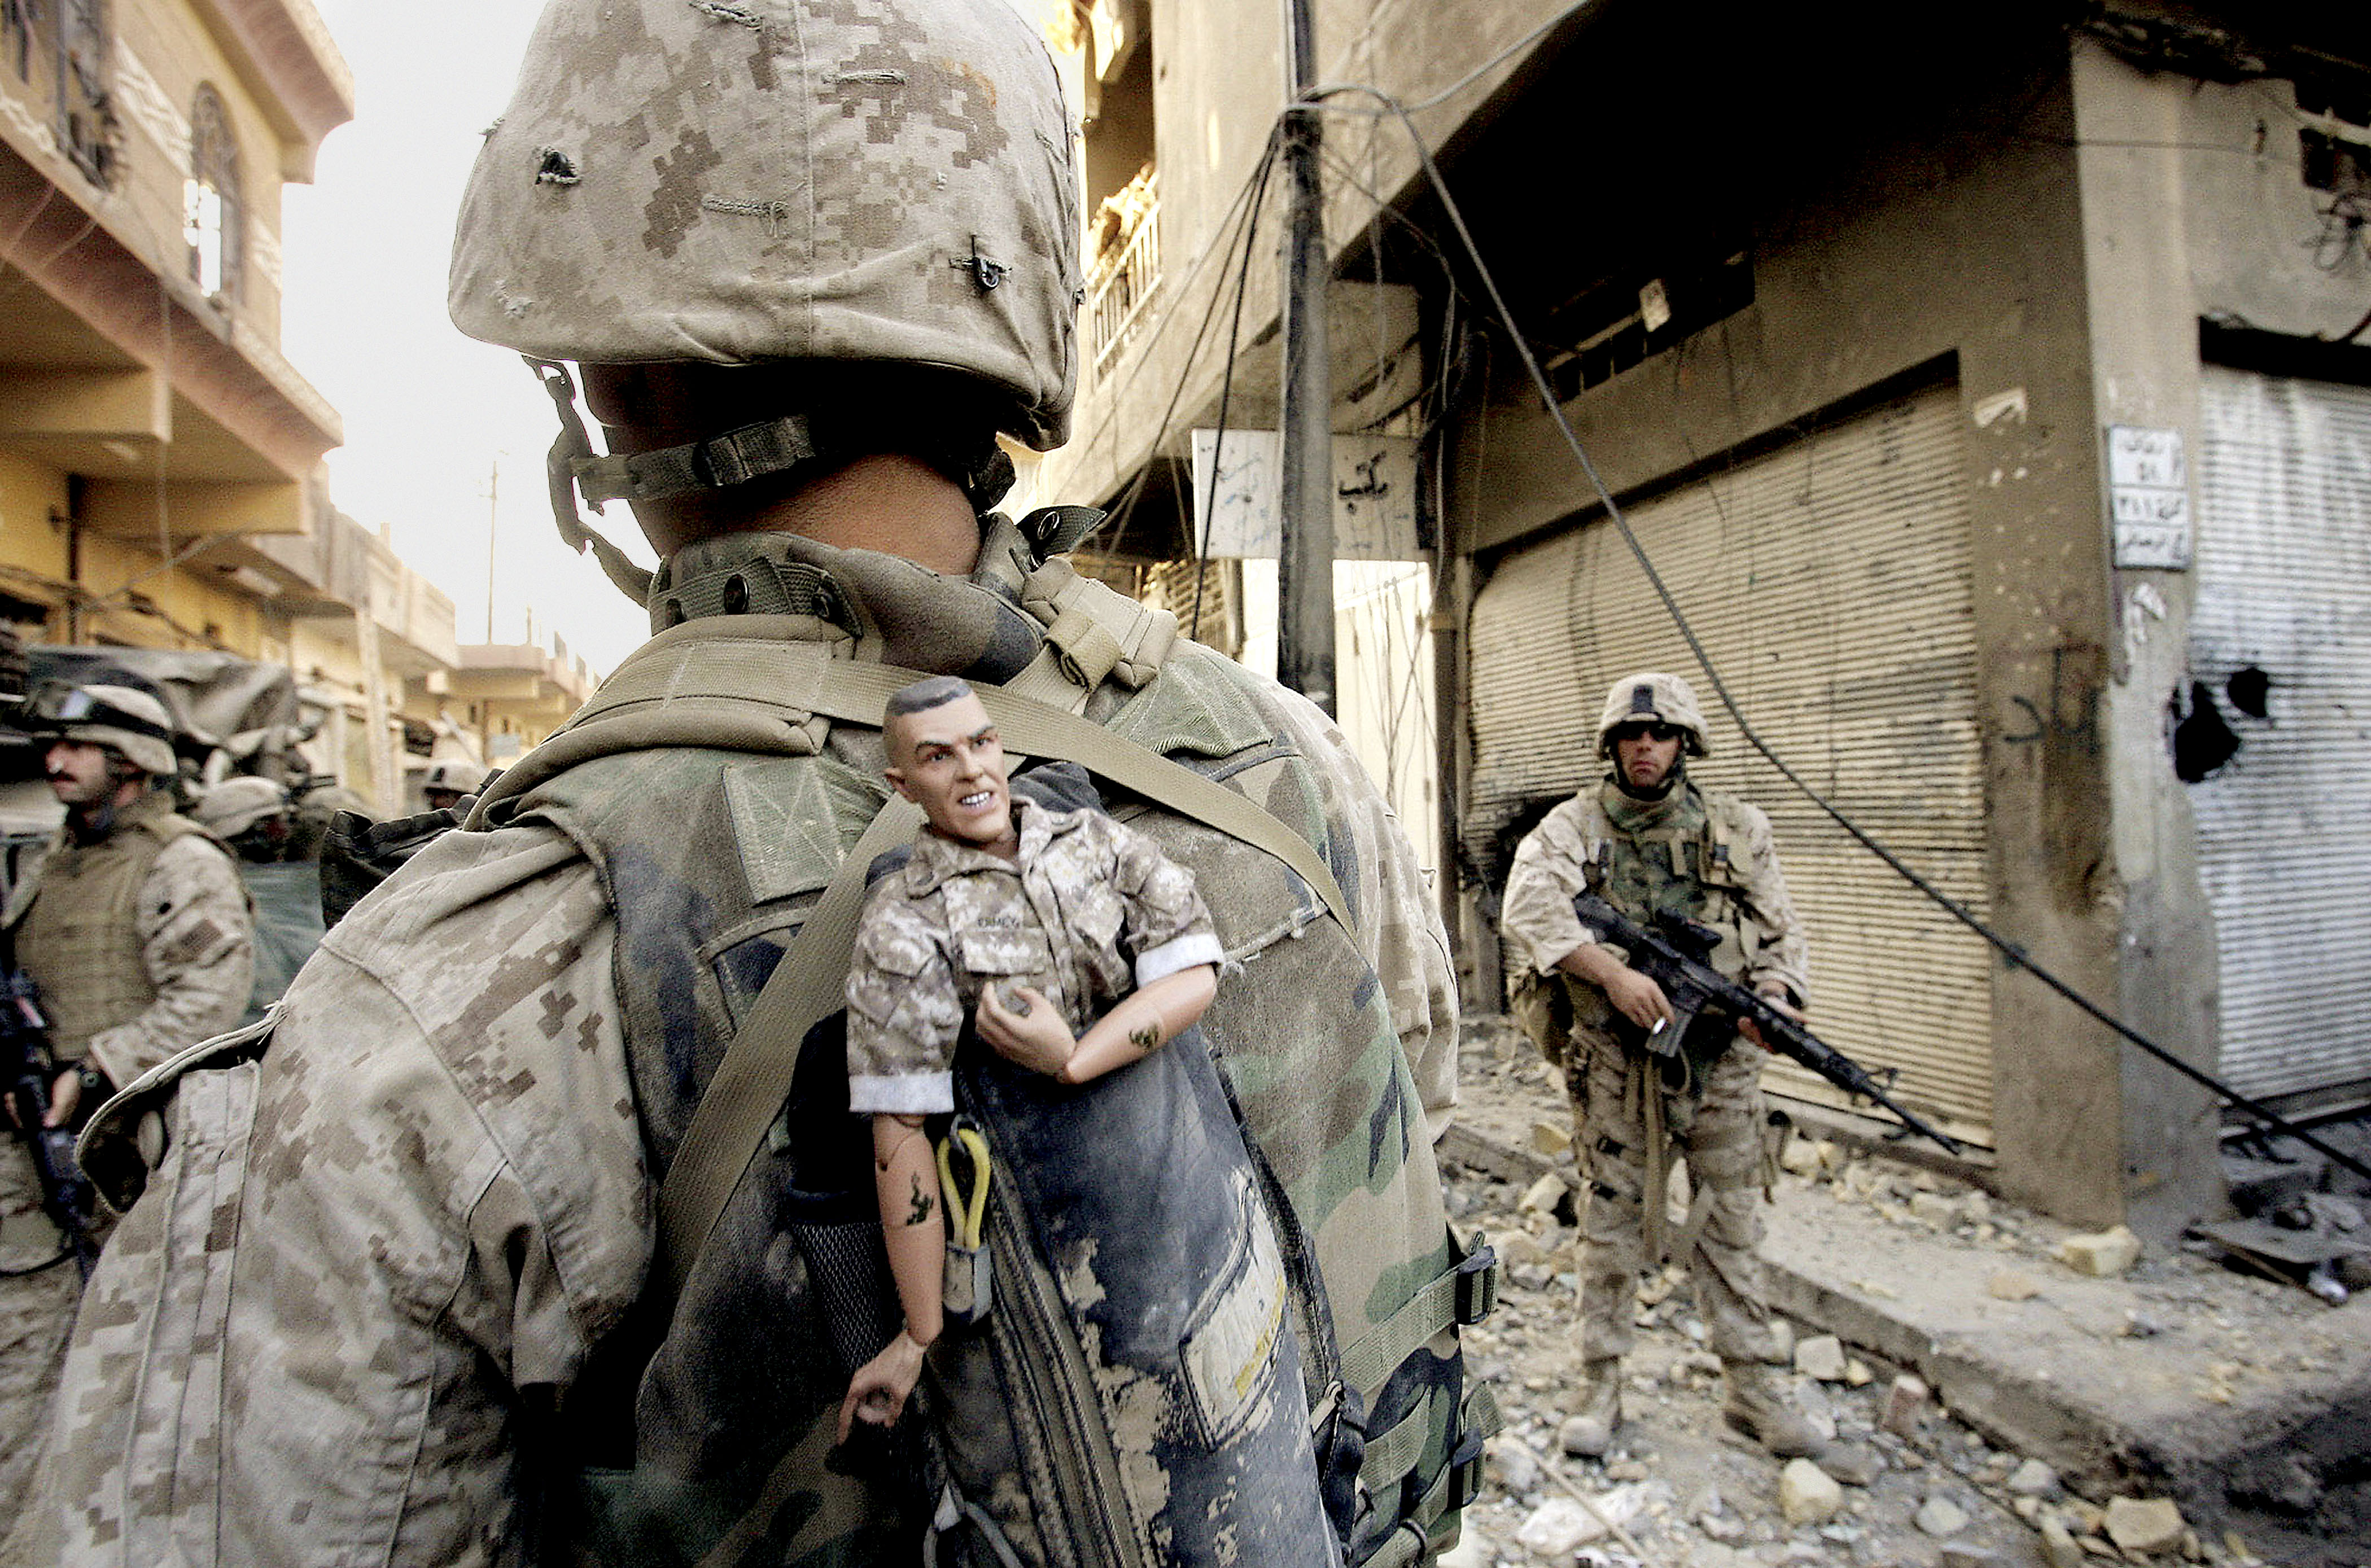 This photograph is one in a portfolio of twenty taken by eleven different Associated Press photographers throughout 2004 in Iraq.  A U.S. Marine of the 1st Division carries a mascot for good luck in his backpack as his unit pushed further into the western part of Fallujah, Iraq, Sunday, Nov. 14, 2004. The Associated Press won a Pulitzer prize in breaking news photography for the series of pictures of bloody combat in Iraq. The award was the AP's 48th Pulitzer. (AP Photo/Anja Niedringhaus)